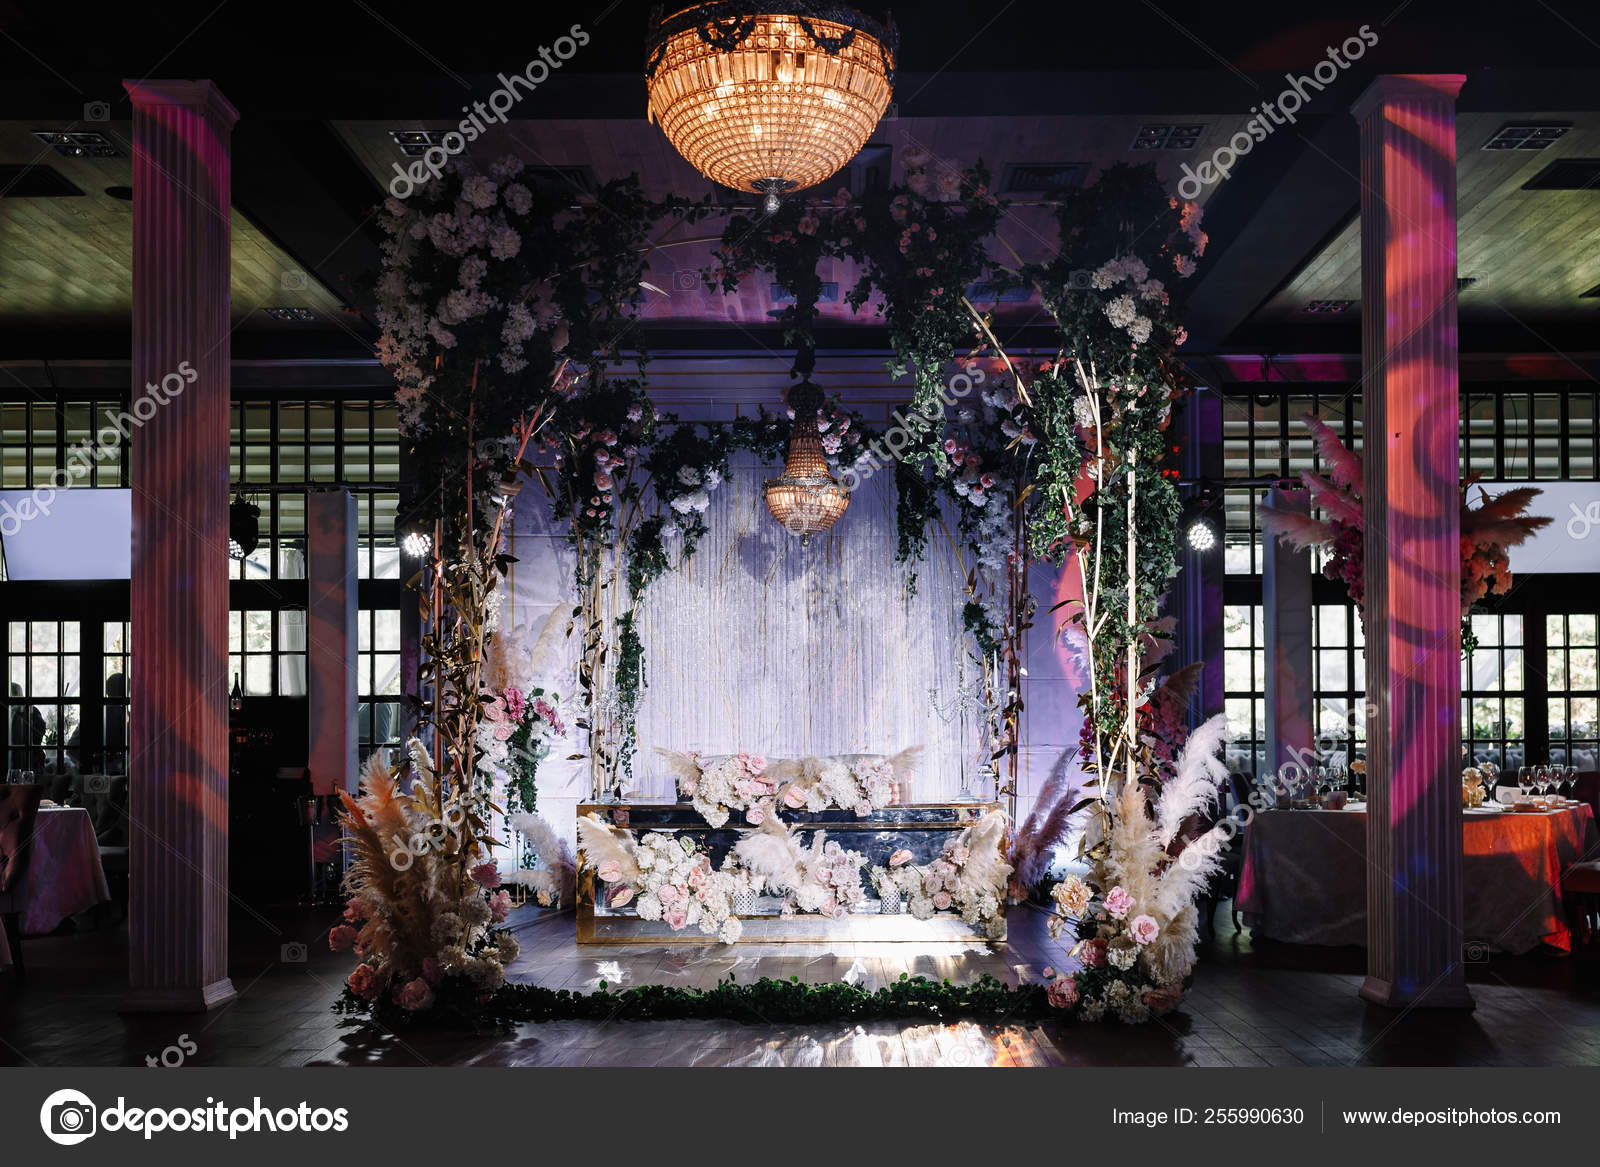 Wedding Hall Decorated Flowers Chic Chandelier Hanging